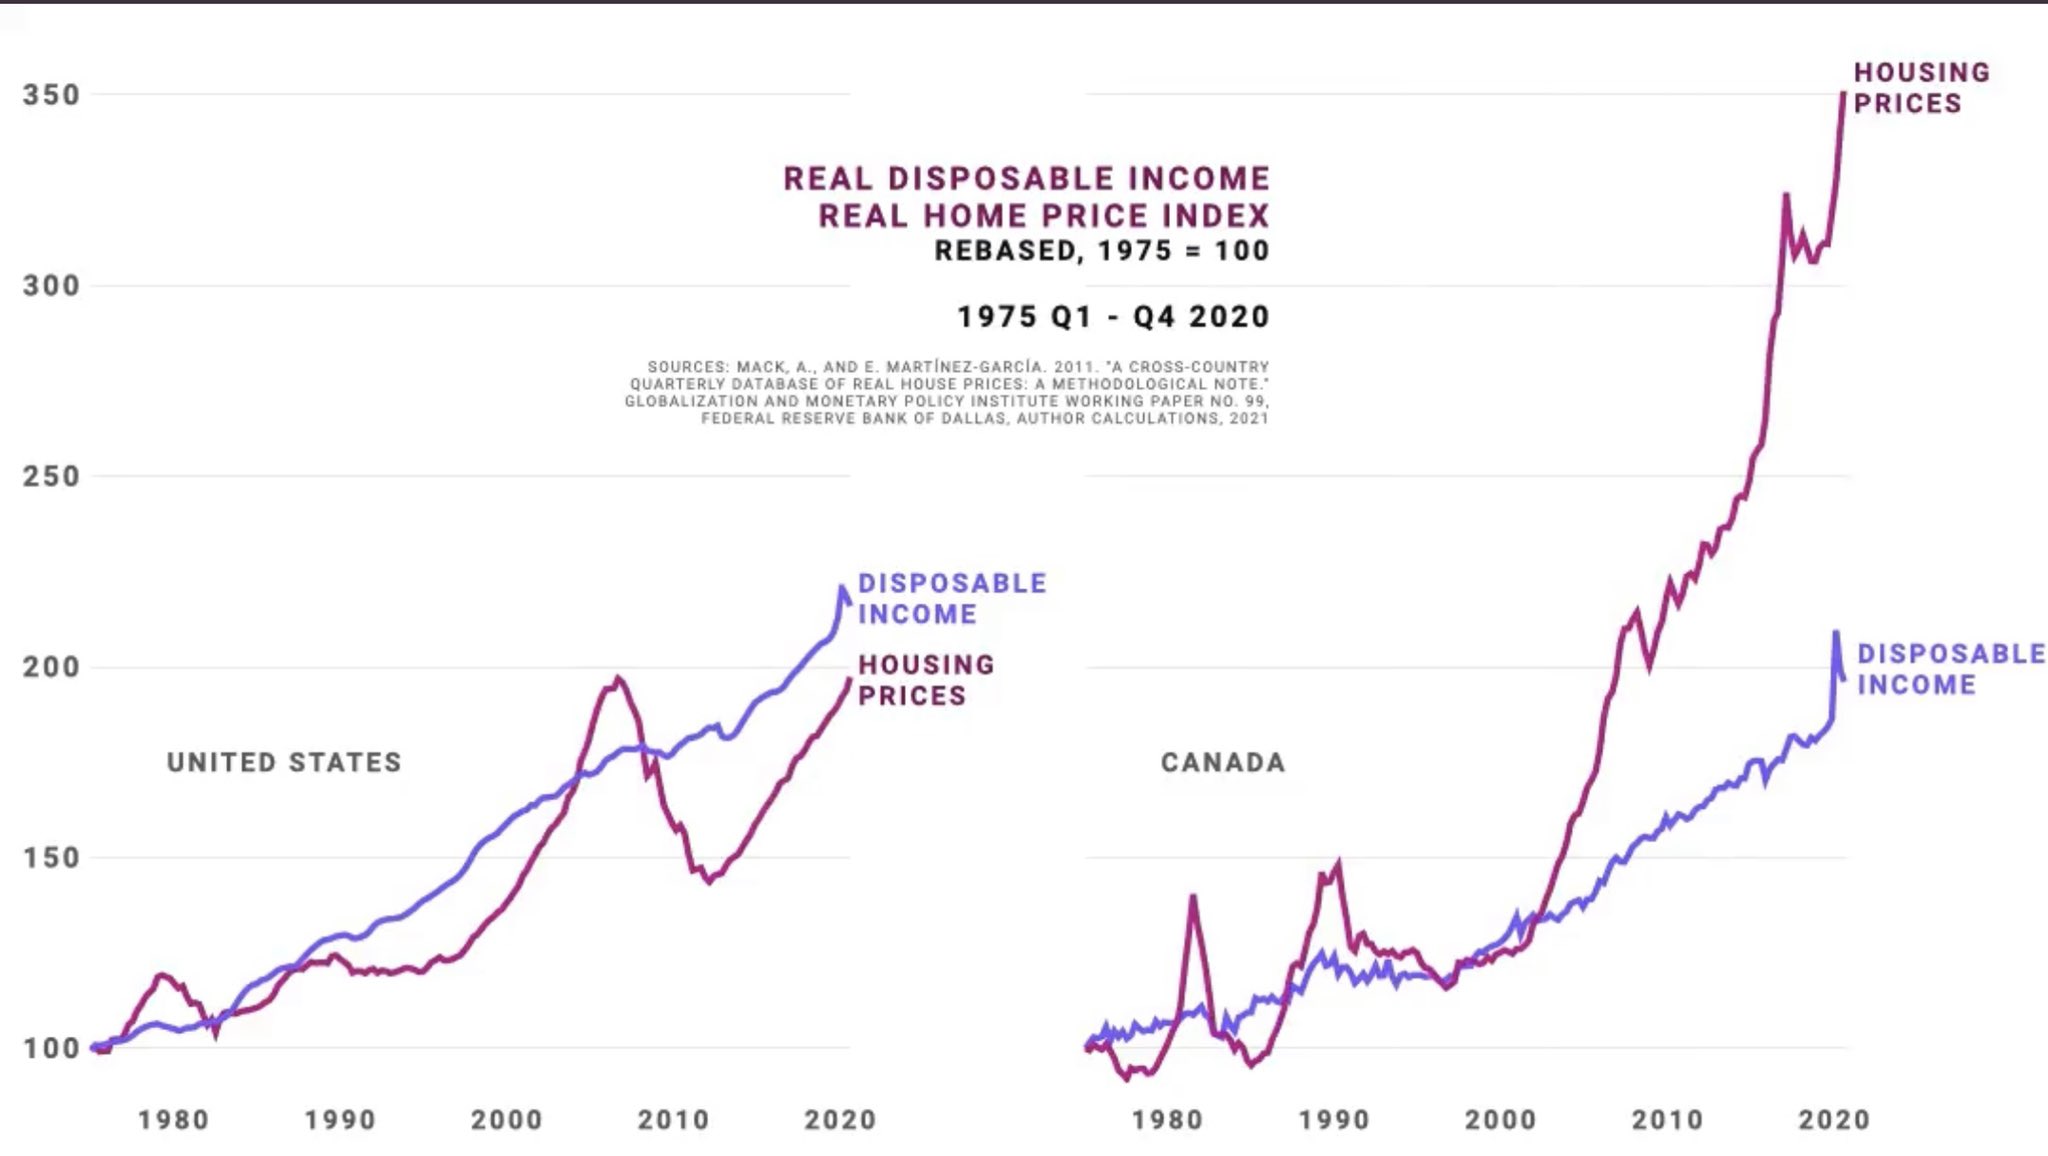 ac_eco 🇺🇦 on Twitter: "This really is an insane chart comparing income to house price growth in the U.S vs Canada. https://t.co/Sf5uwEZLGg" / Twitter